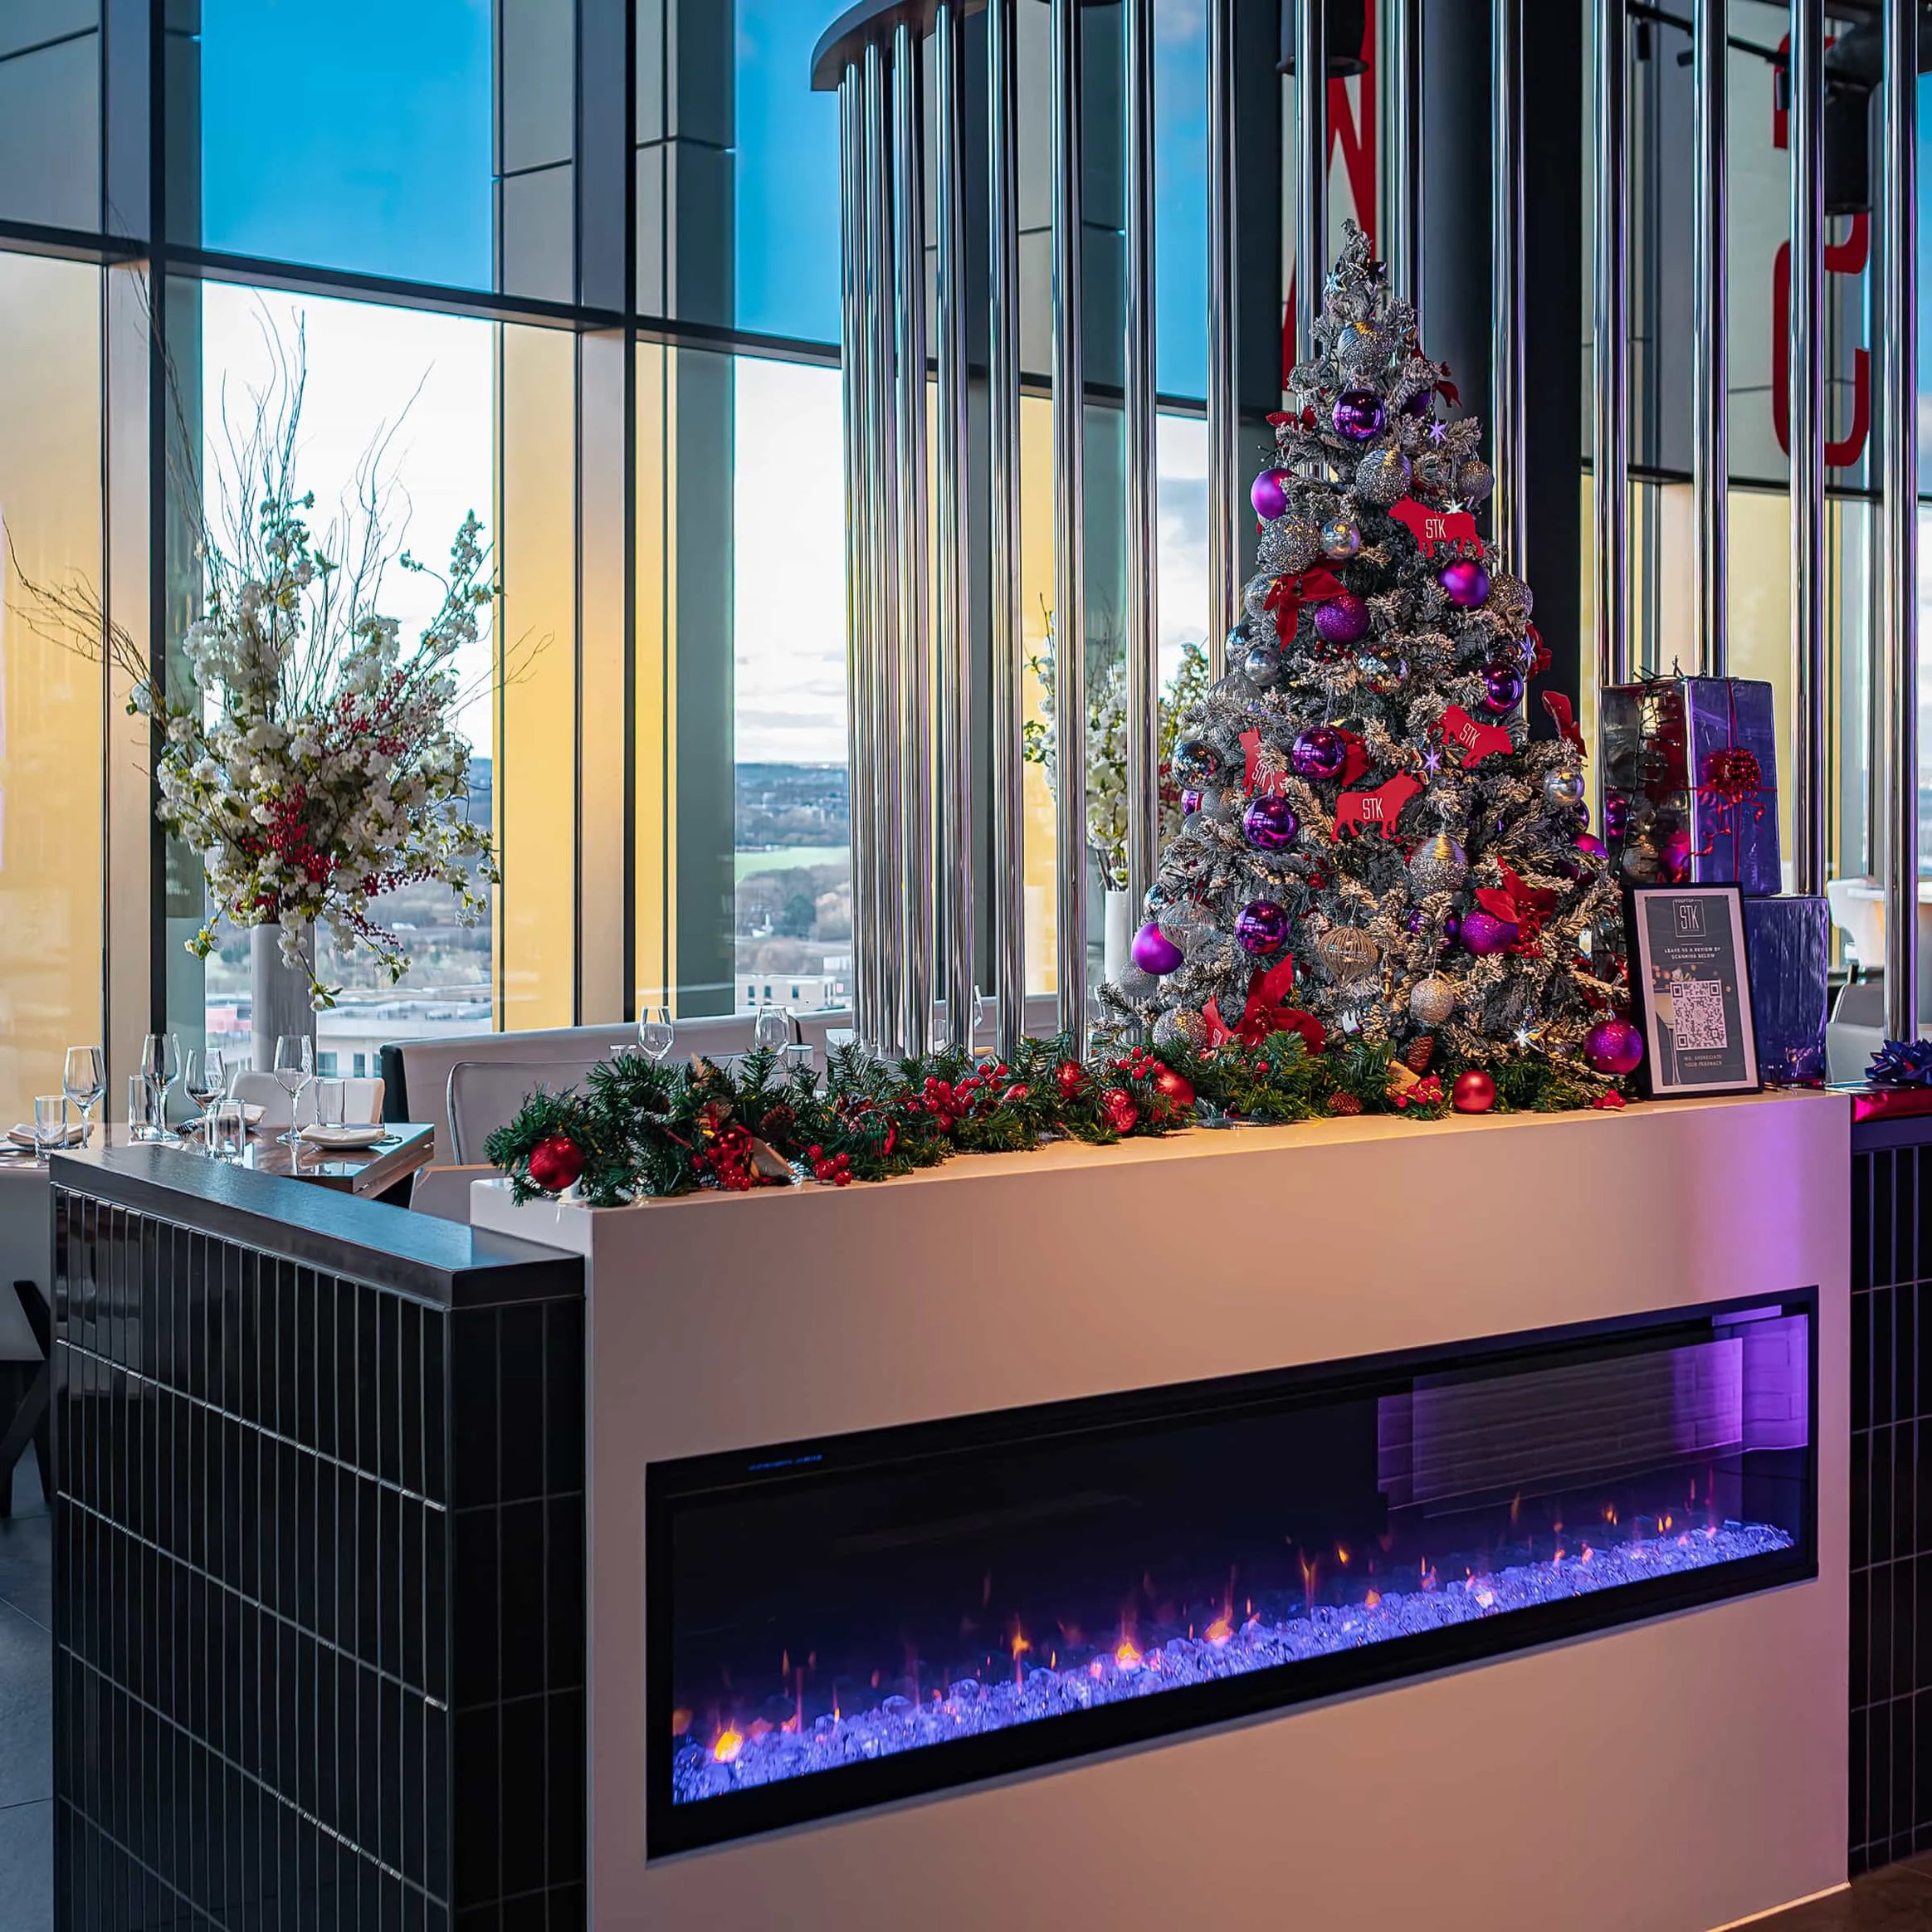 Warmly lit dining space at STK Steakhouse featuring a festive Christmas tree adorned with purple and red decorations and a modern electric fireplace, with a scenic city backdrop visible through expansive windows.